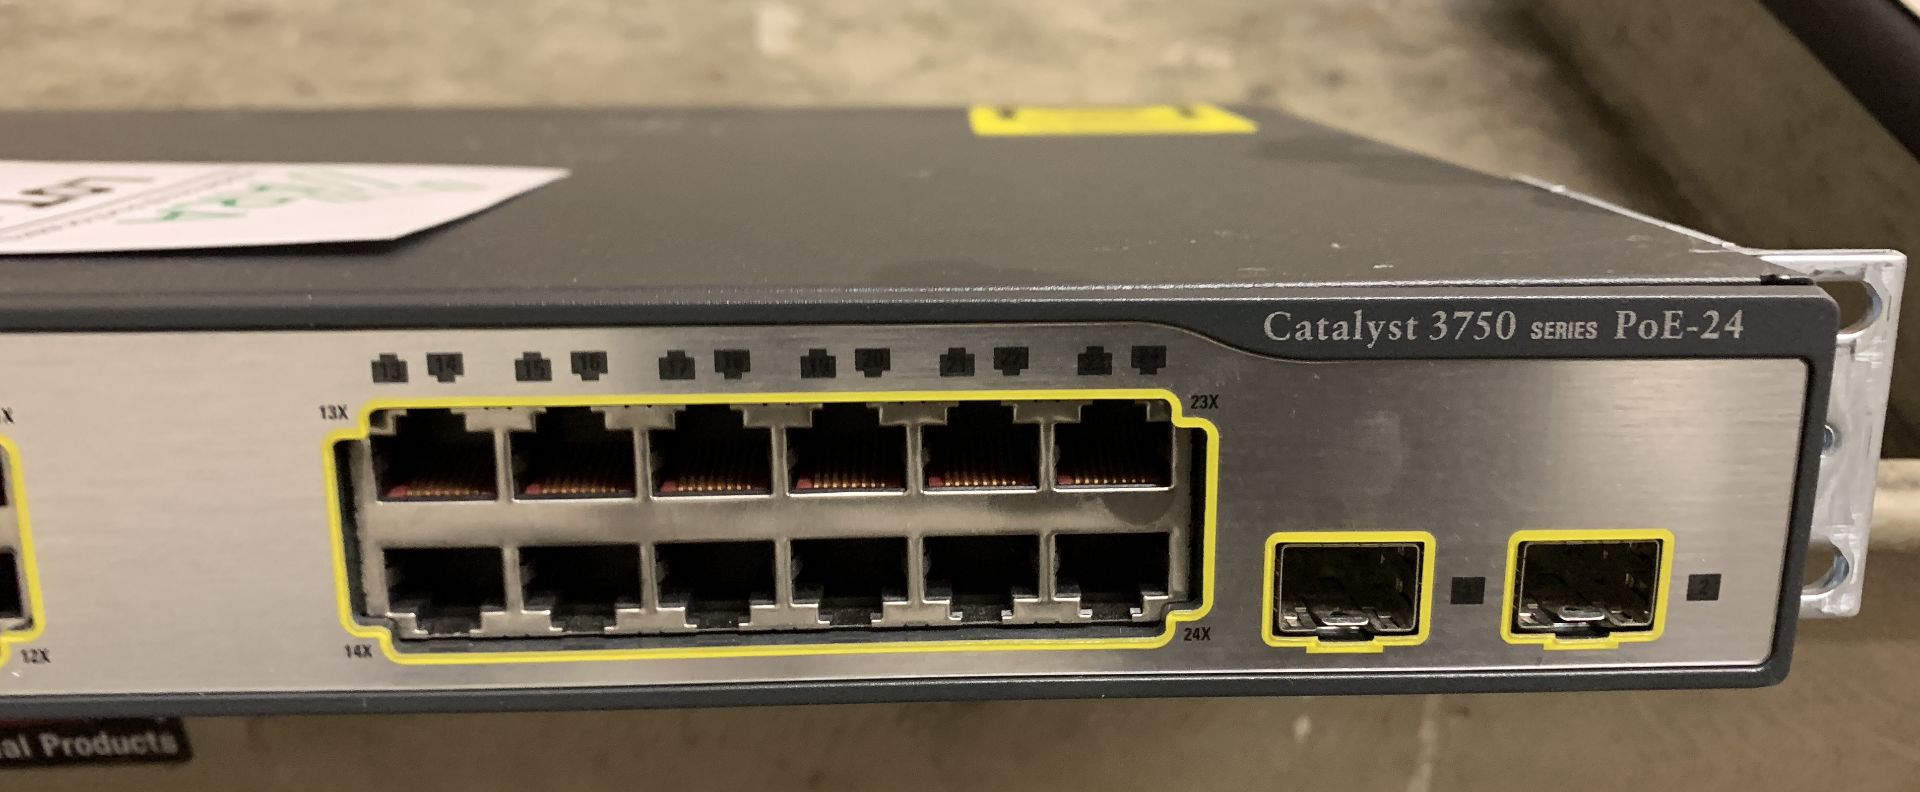 CISCO CATALYST 3750 SERIES POE 24-PORT NETWORK ETHERNET SWITCH - Image 2 of 4